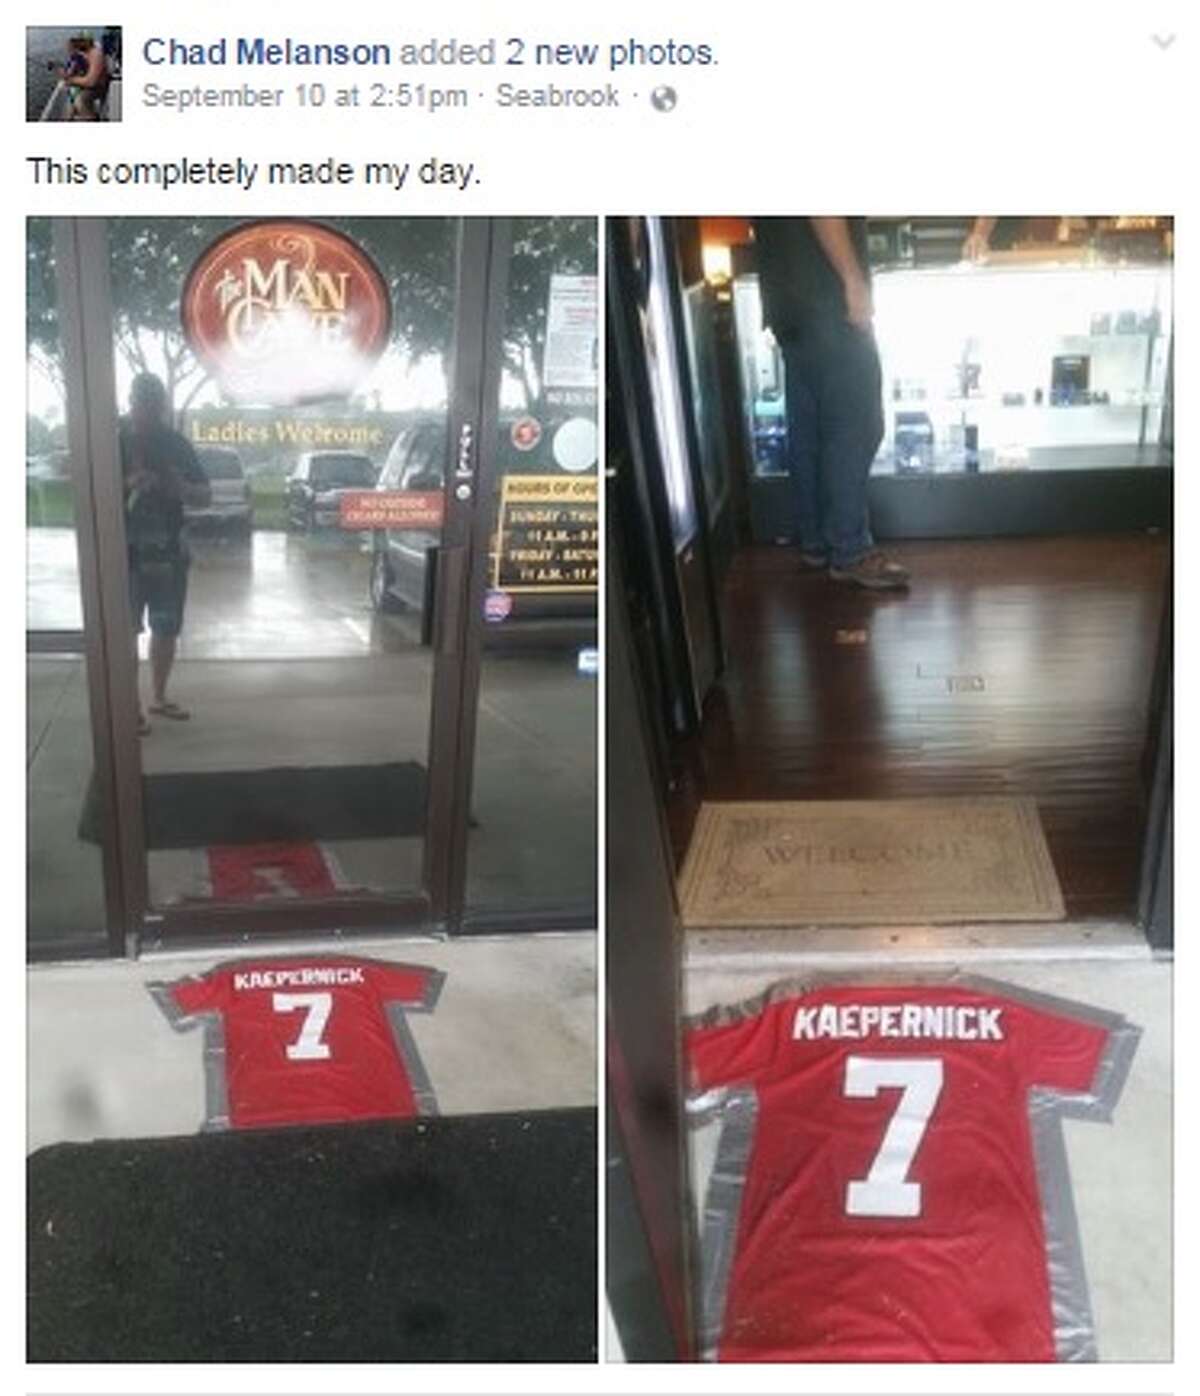 The Man Cave Cigar Lounge in League City is going viral on social media thanks to a new doormat made from a Colin Kaepernick jersey.